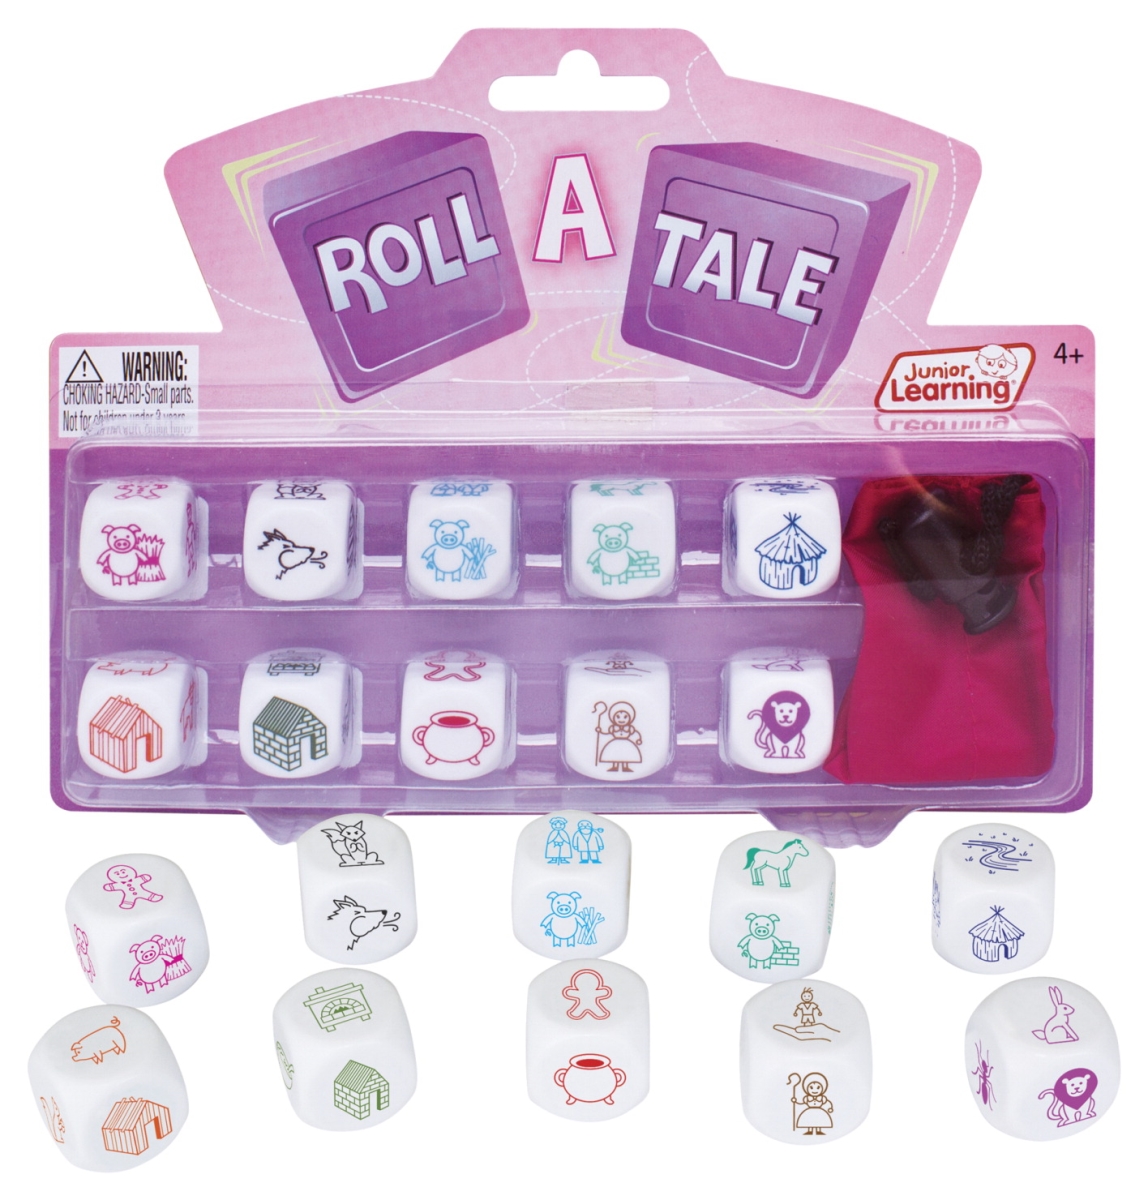 2020756 Roll A Tale Dice - 4 Plus Year